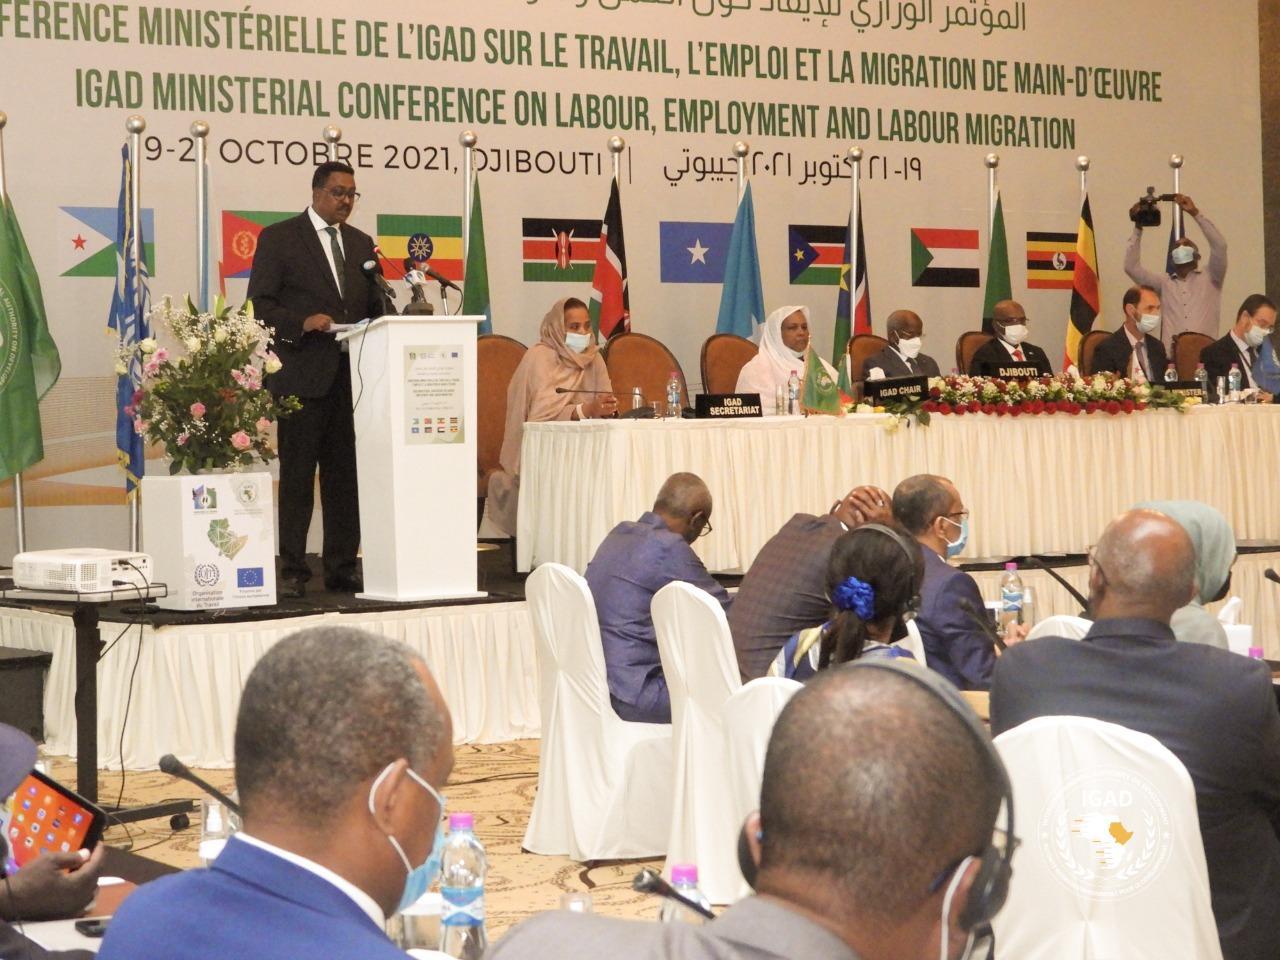 Official Remarks by Dr. Workneh Gebeyehu, IGAD Executive Secretary at the IGAD Ministerial Conference on Employment, Labour and Labour Migration 21st October 2021 Djibouti